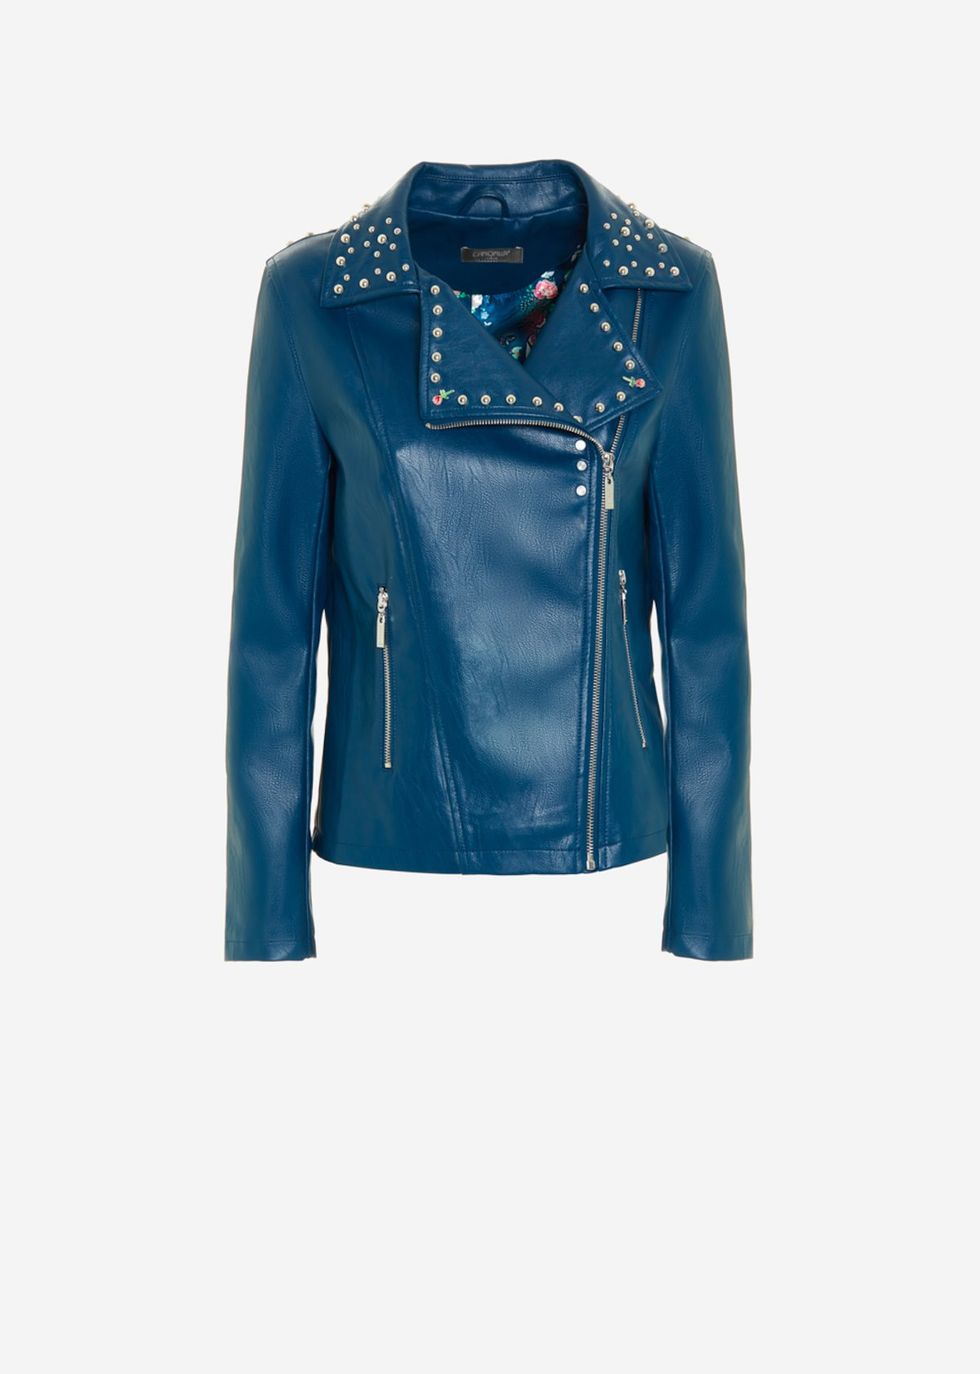 Clothing, Jacket, Leather, Blue, Leather jacket, Outerwear, Turquoise, Cobalt blue, Textile, Teal, 